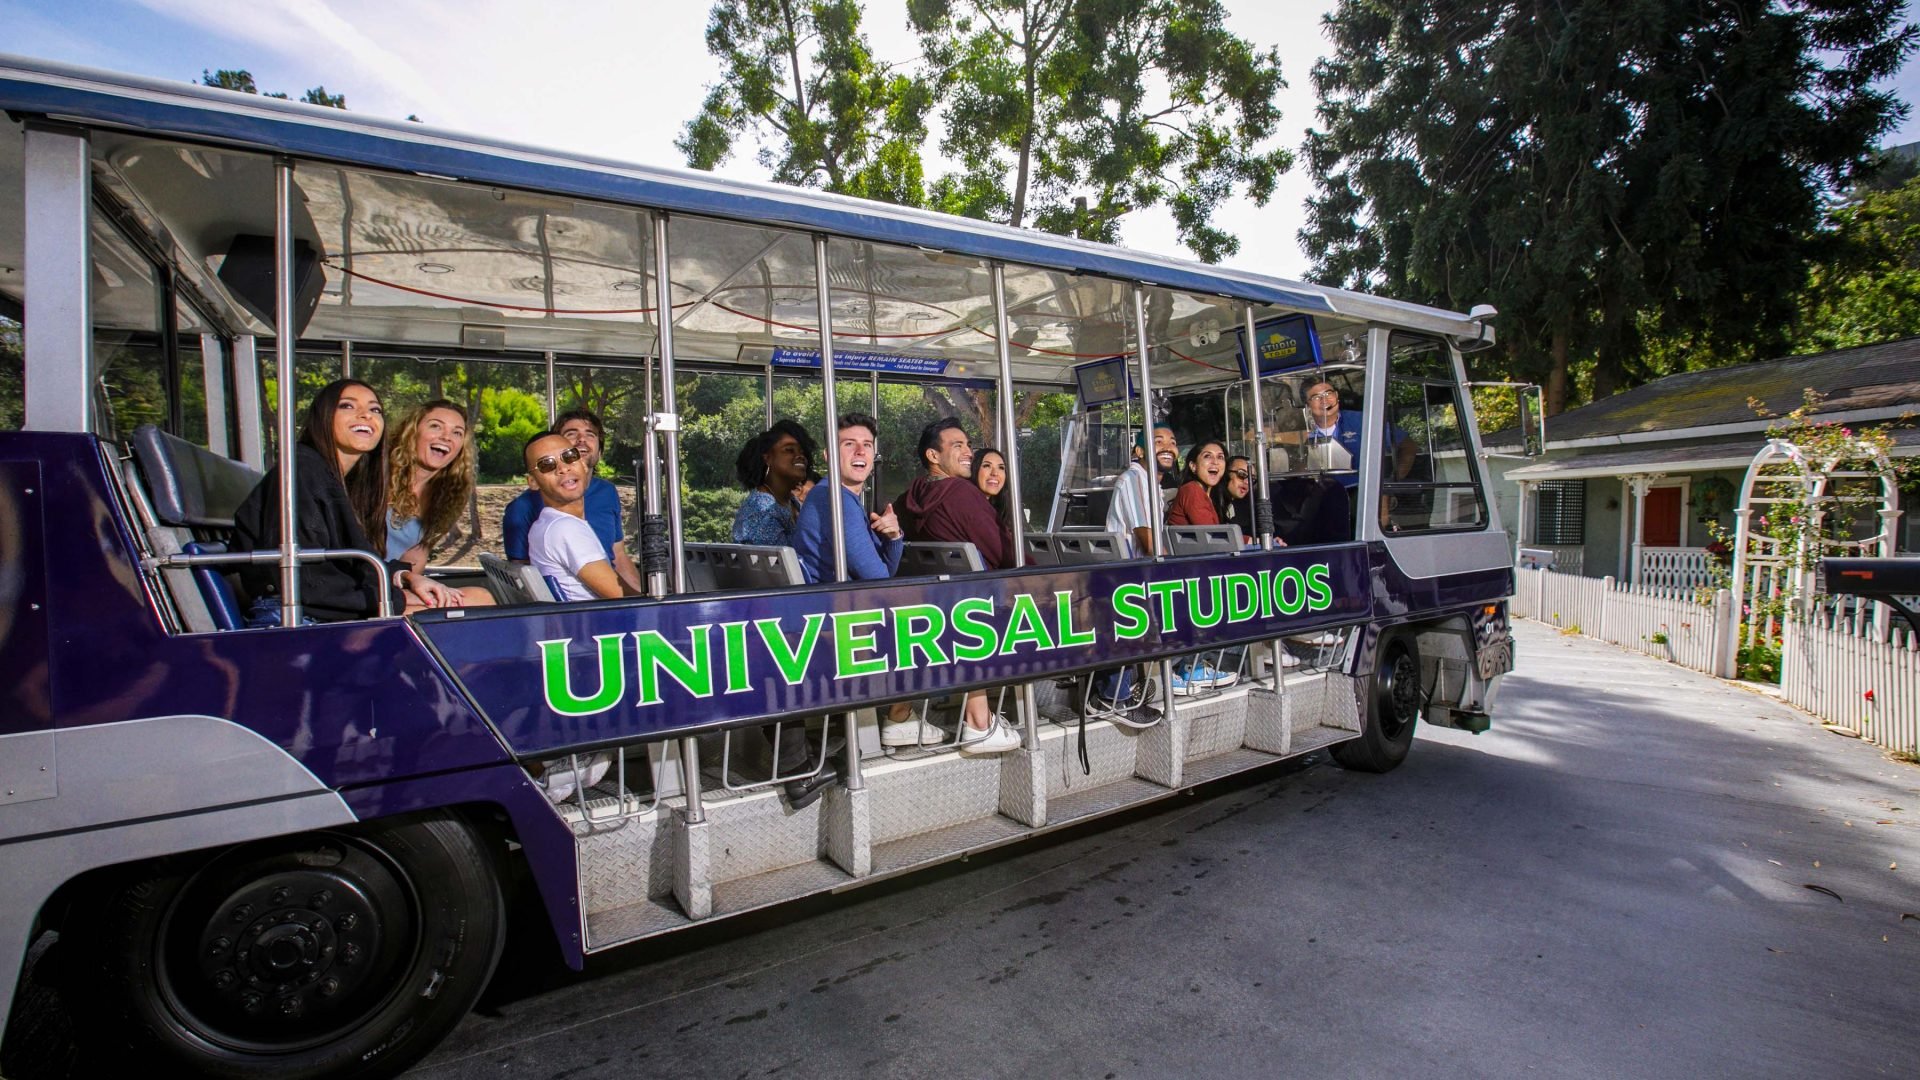 Last Chance! Save Up to $150 on 3-Park Universal Orlando Tickets